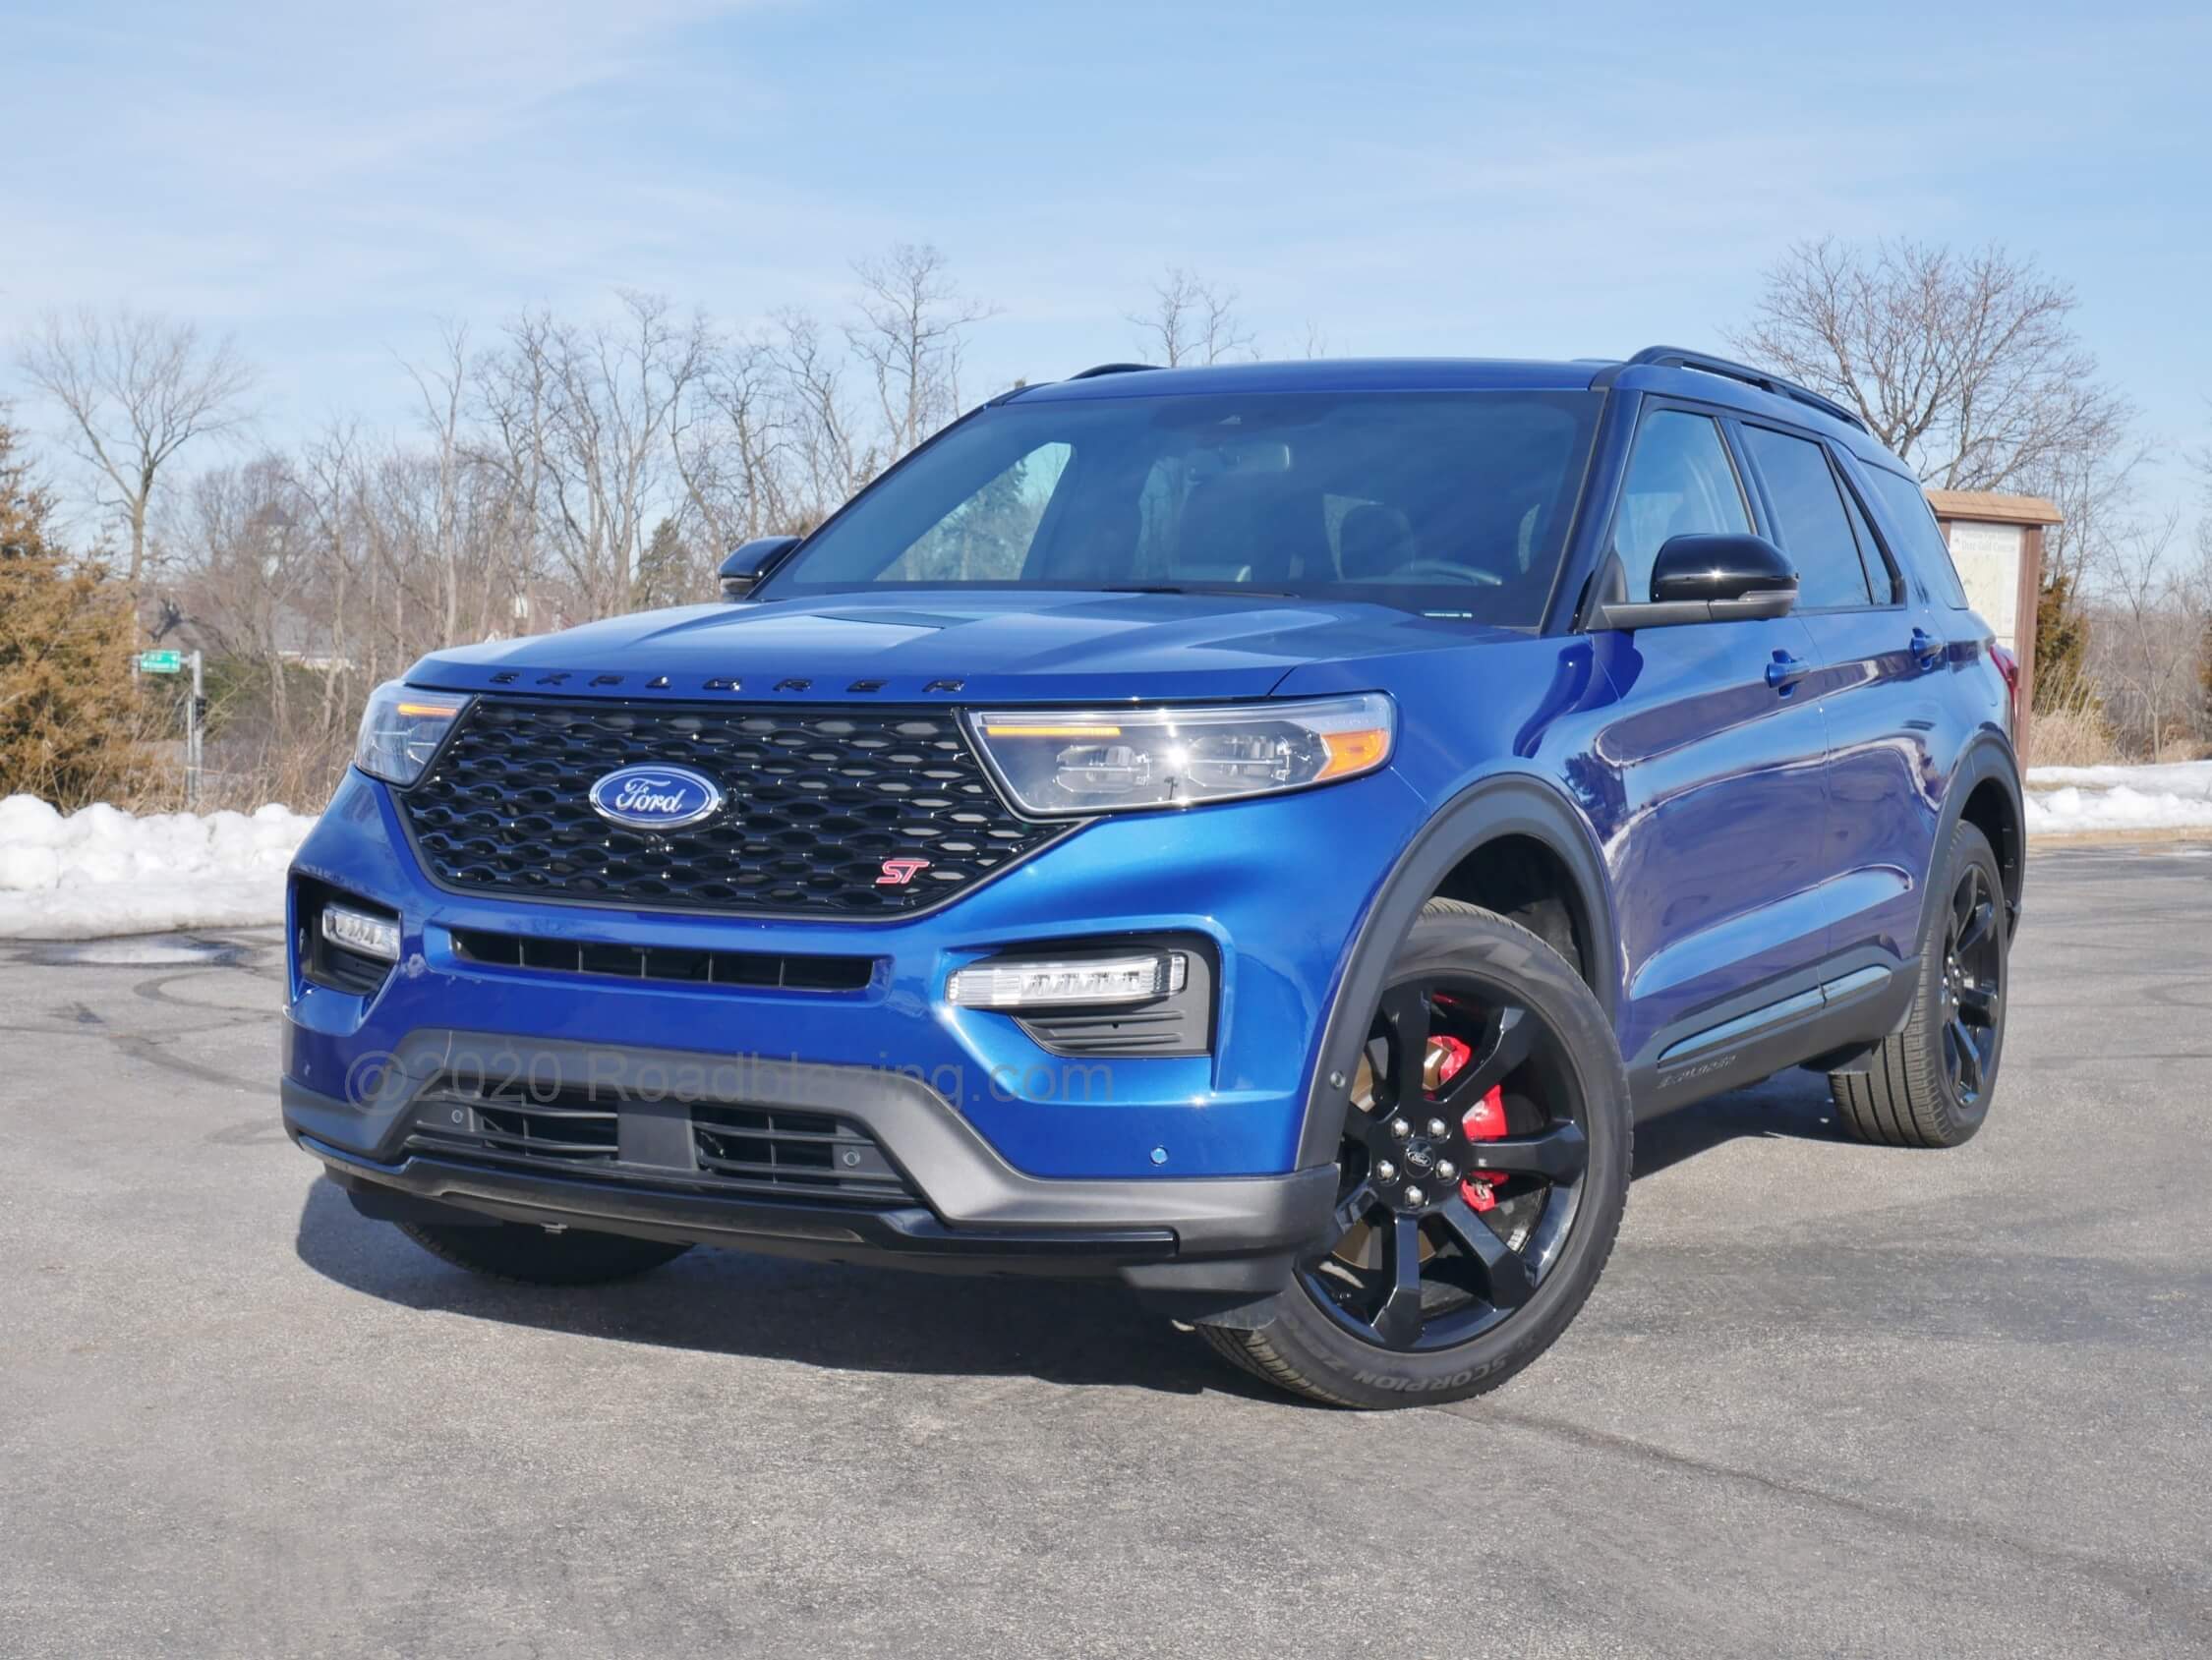 2020 Ford Explorer ST: With "EXPLORER" spelled boldly on the hood overhang, the front treatment darkened drawn but muscular treatment conveys intimidation.